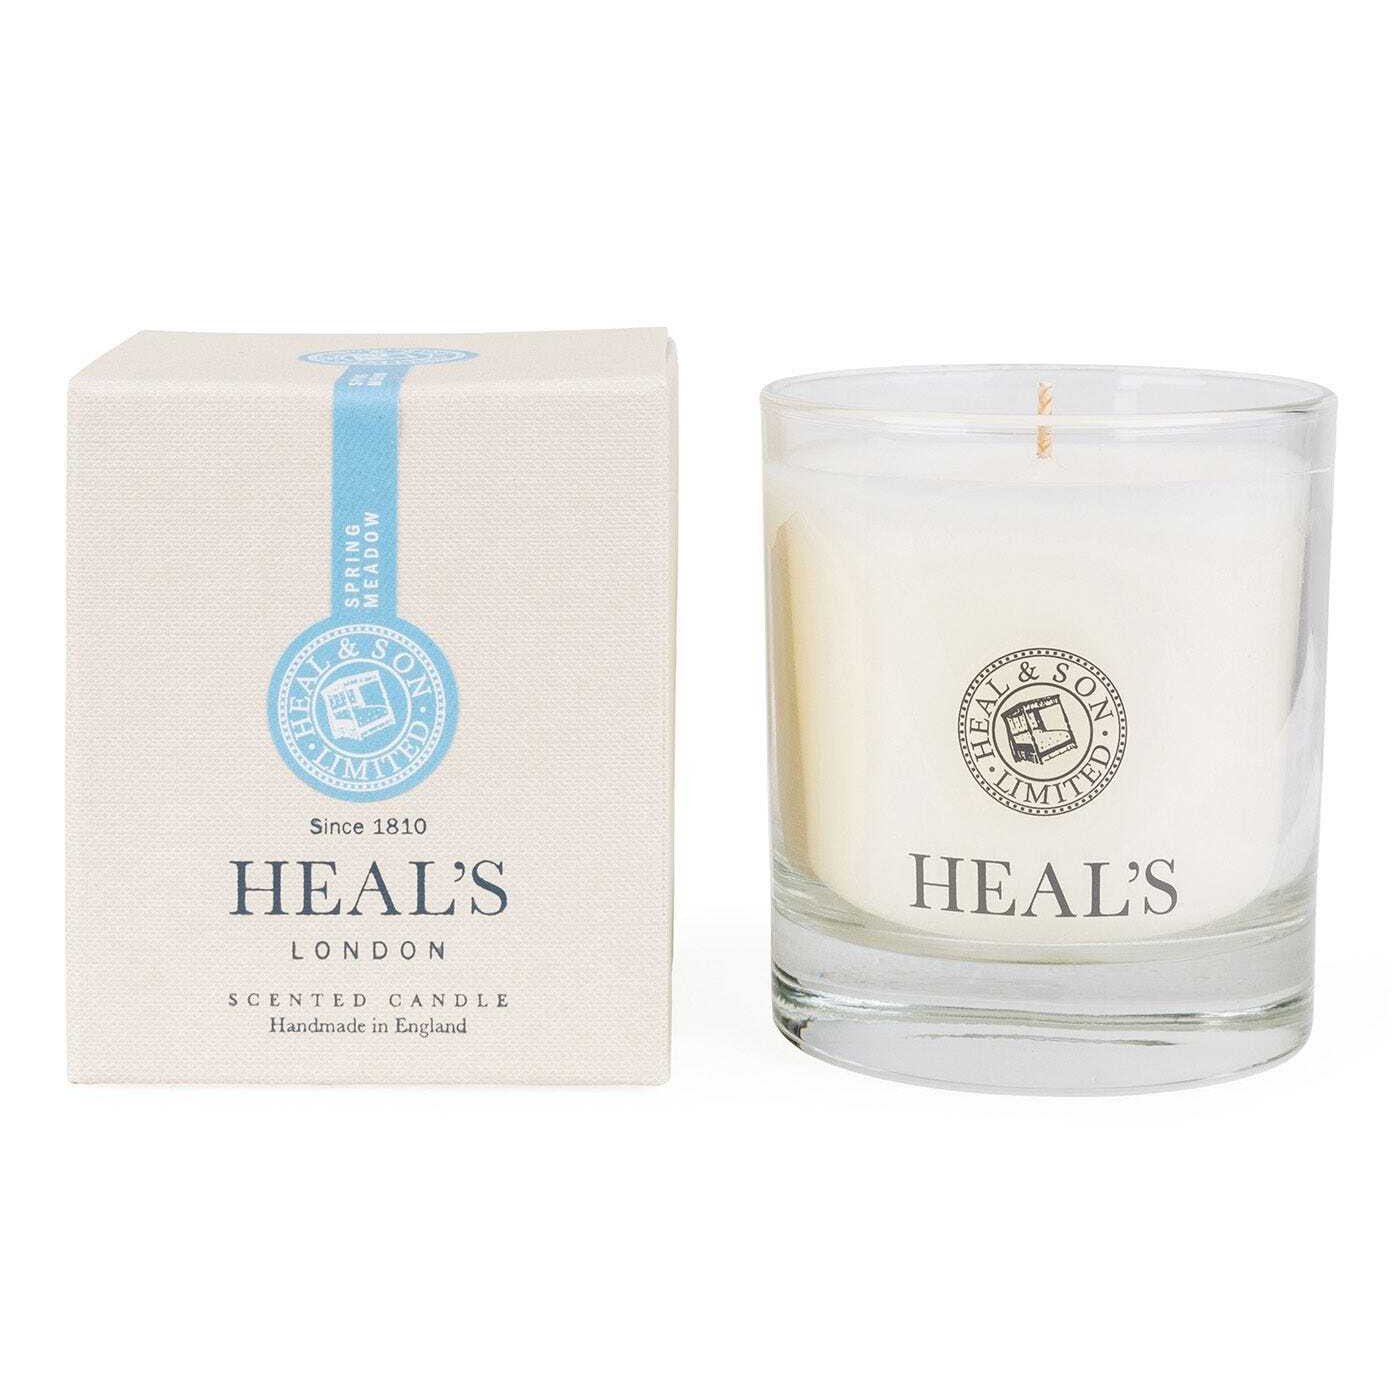 Heal's Spring Meadow Scented Glass Candle - image 1